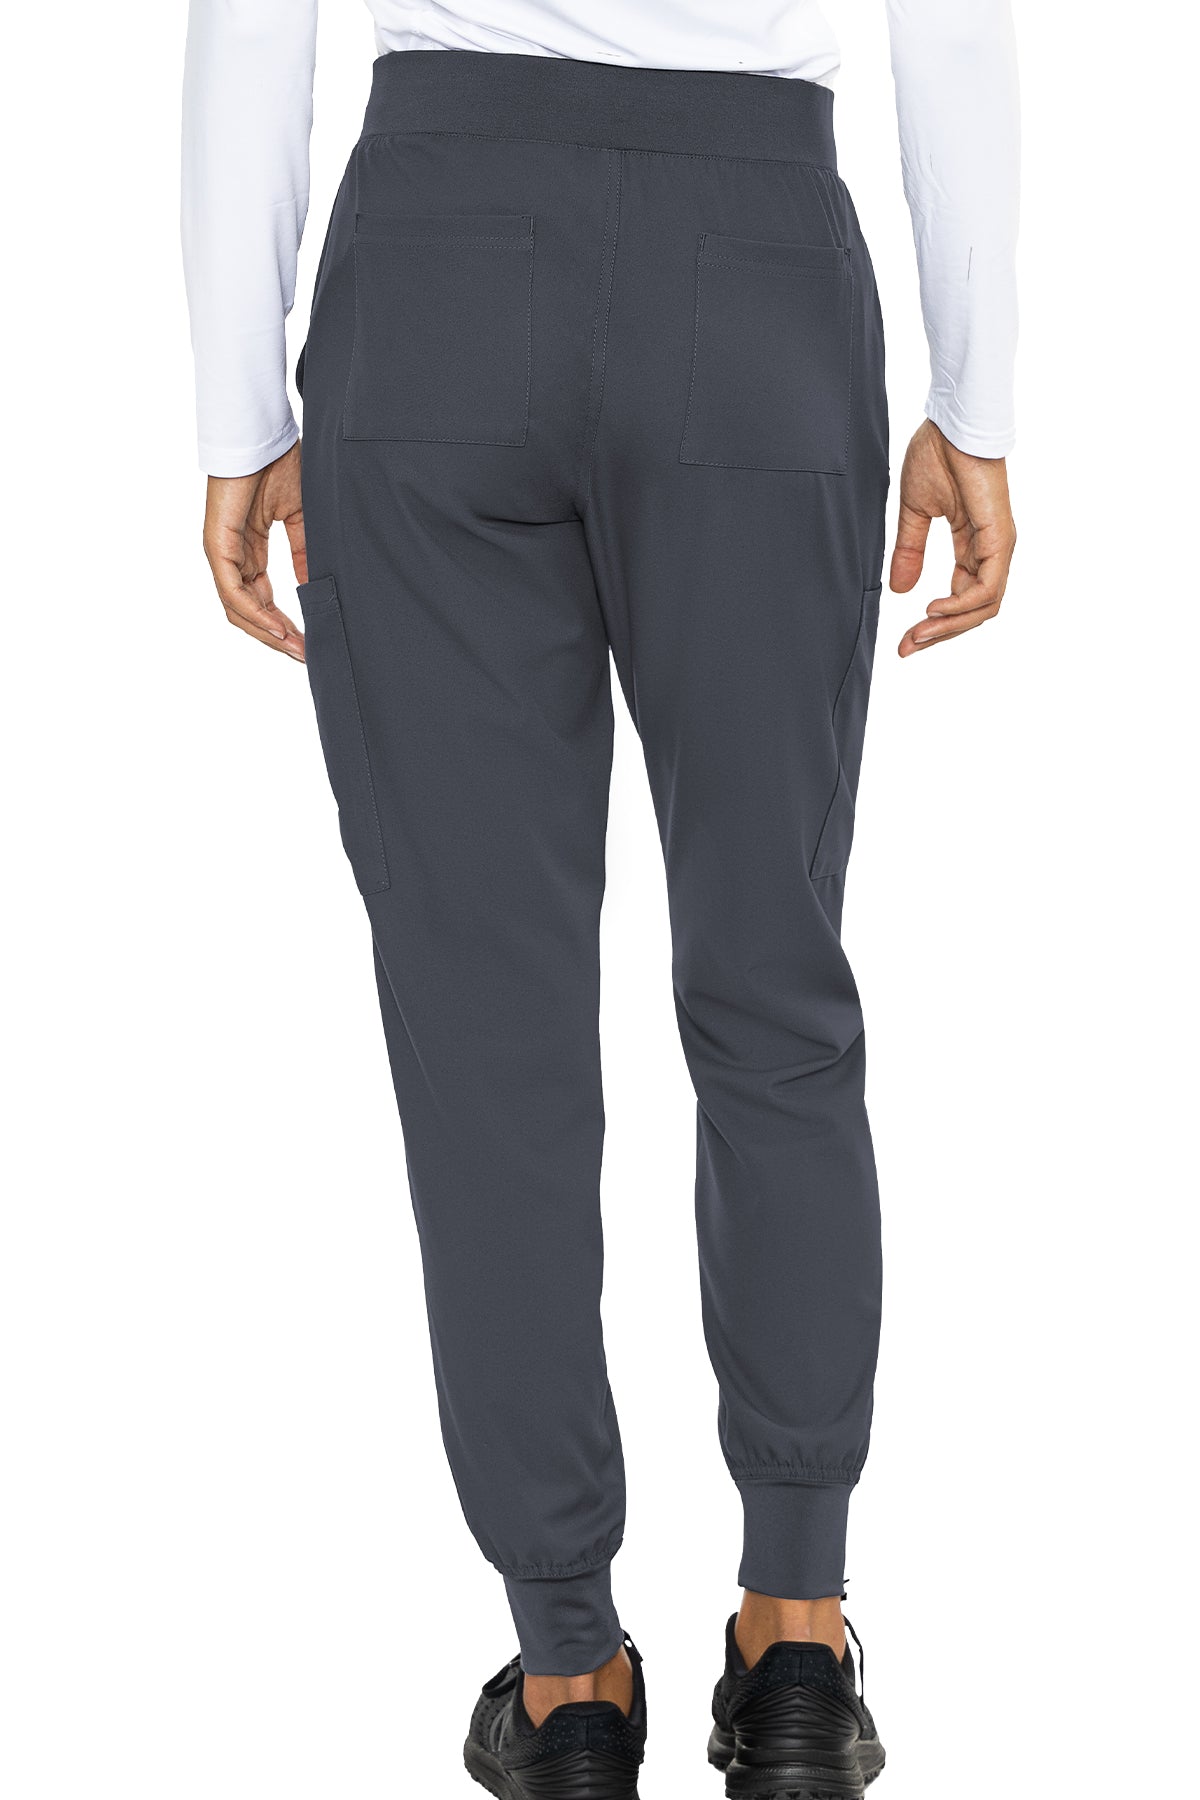 Med Couture 2711 Insight Jogger Pant Pewter Grey Front